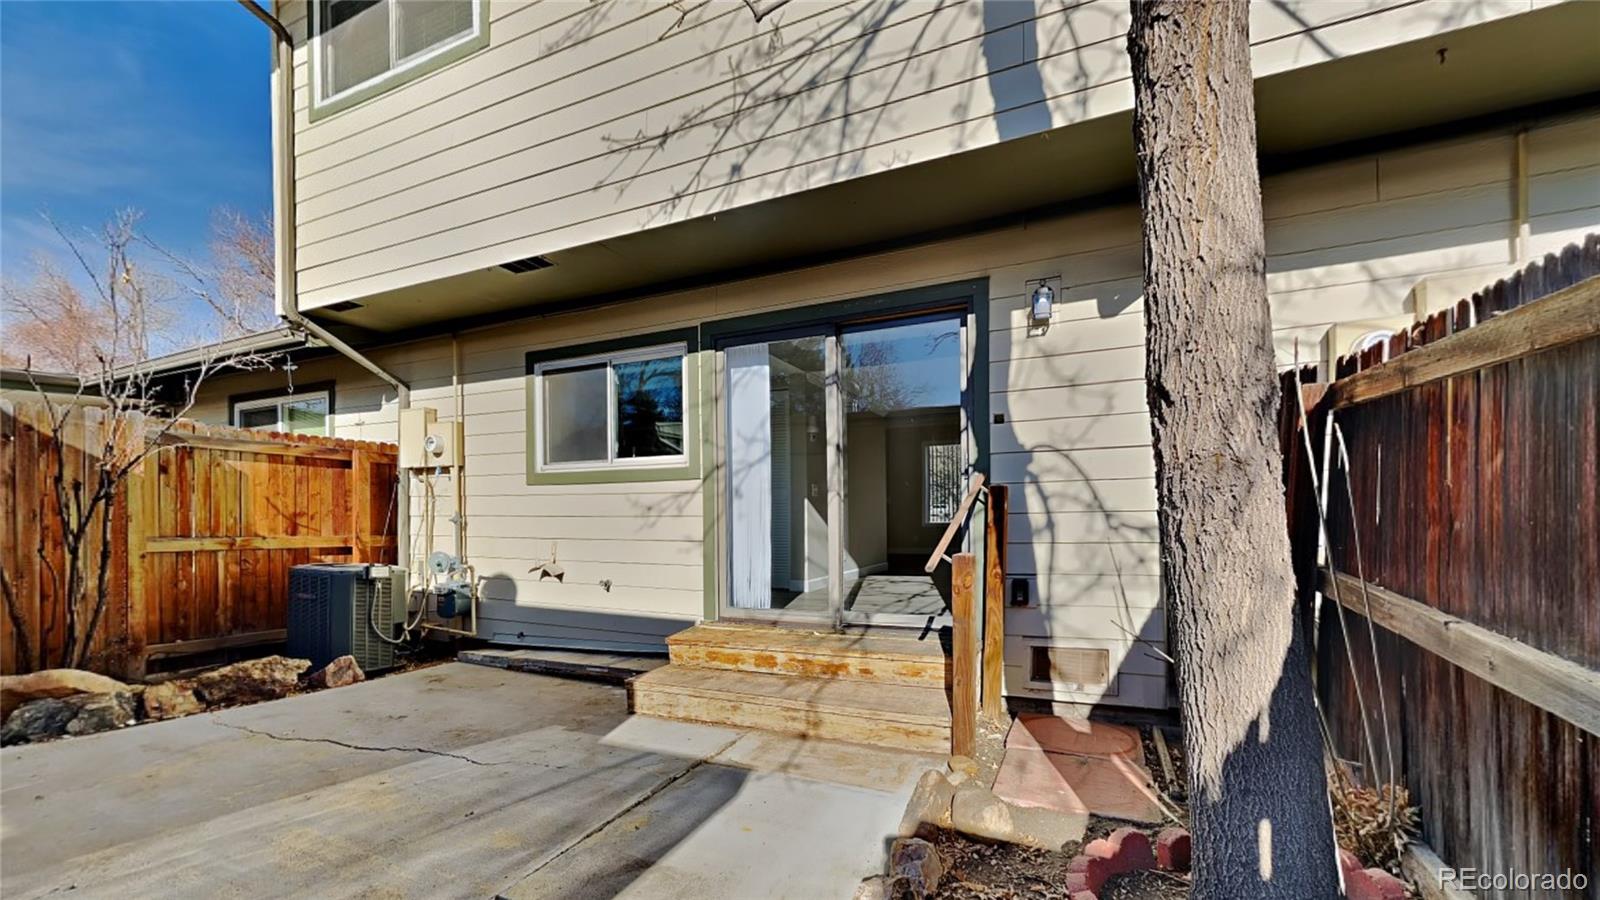 Report Image for 504 S Carr Street,Lakewood, Colorado